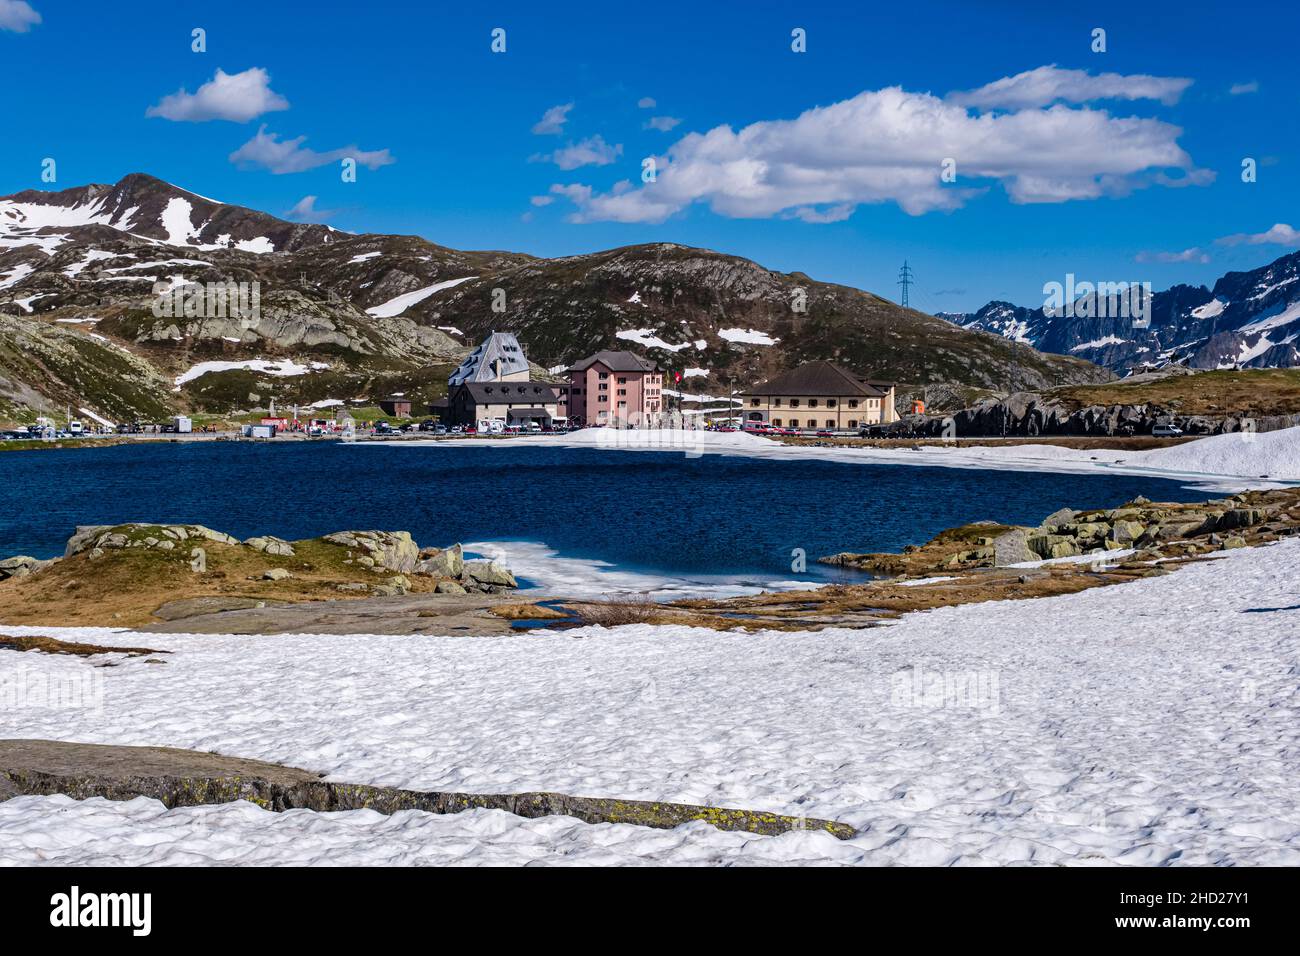 Lakes and buildings, still covered in snow in June, on top of Gotthard Pass at 2106 m, connecting the cantons of Ticino and Uri. Stock Photo